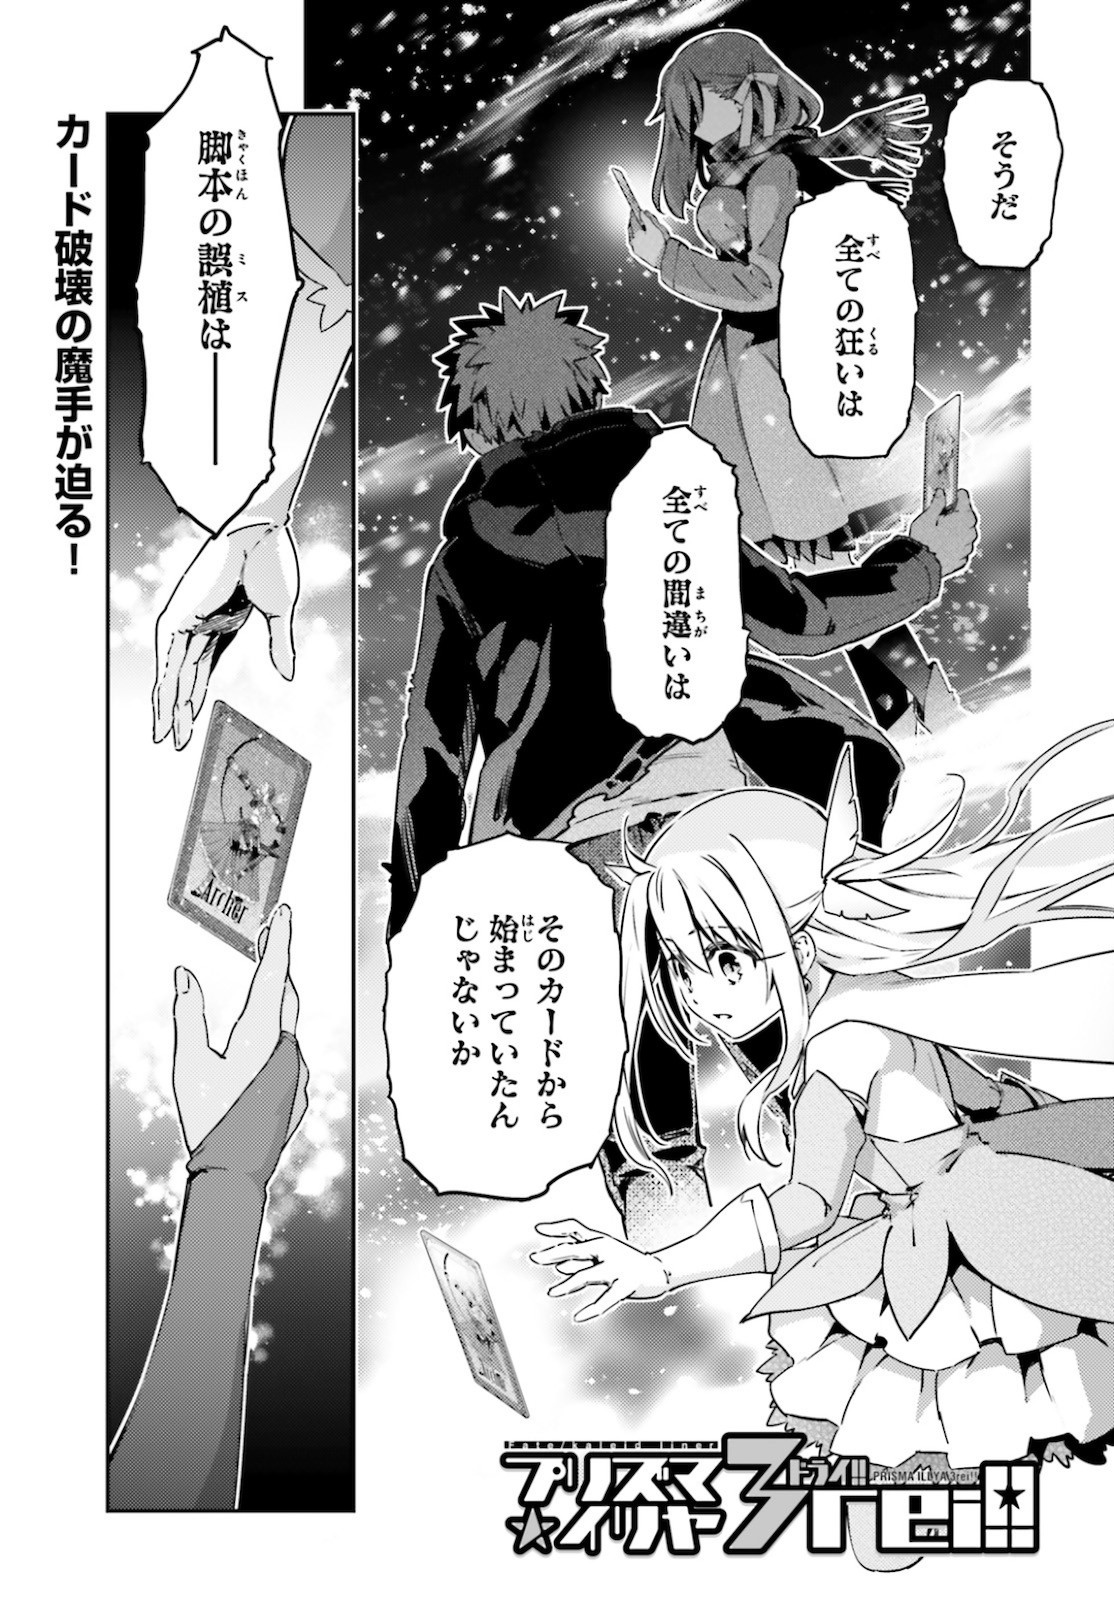 Fate/Kaleid Liner Prisma Illya Drei! - Chapter 59-2 - Page 1